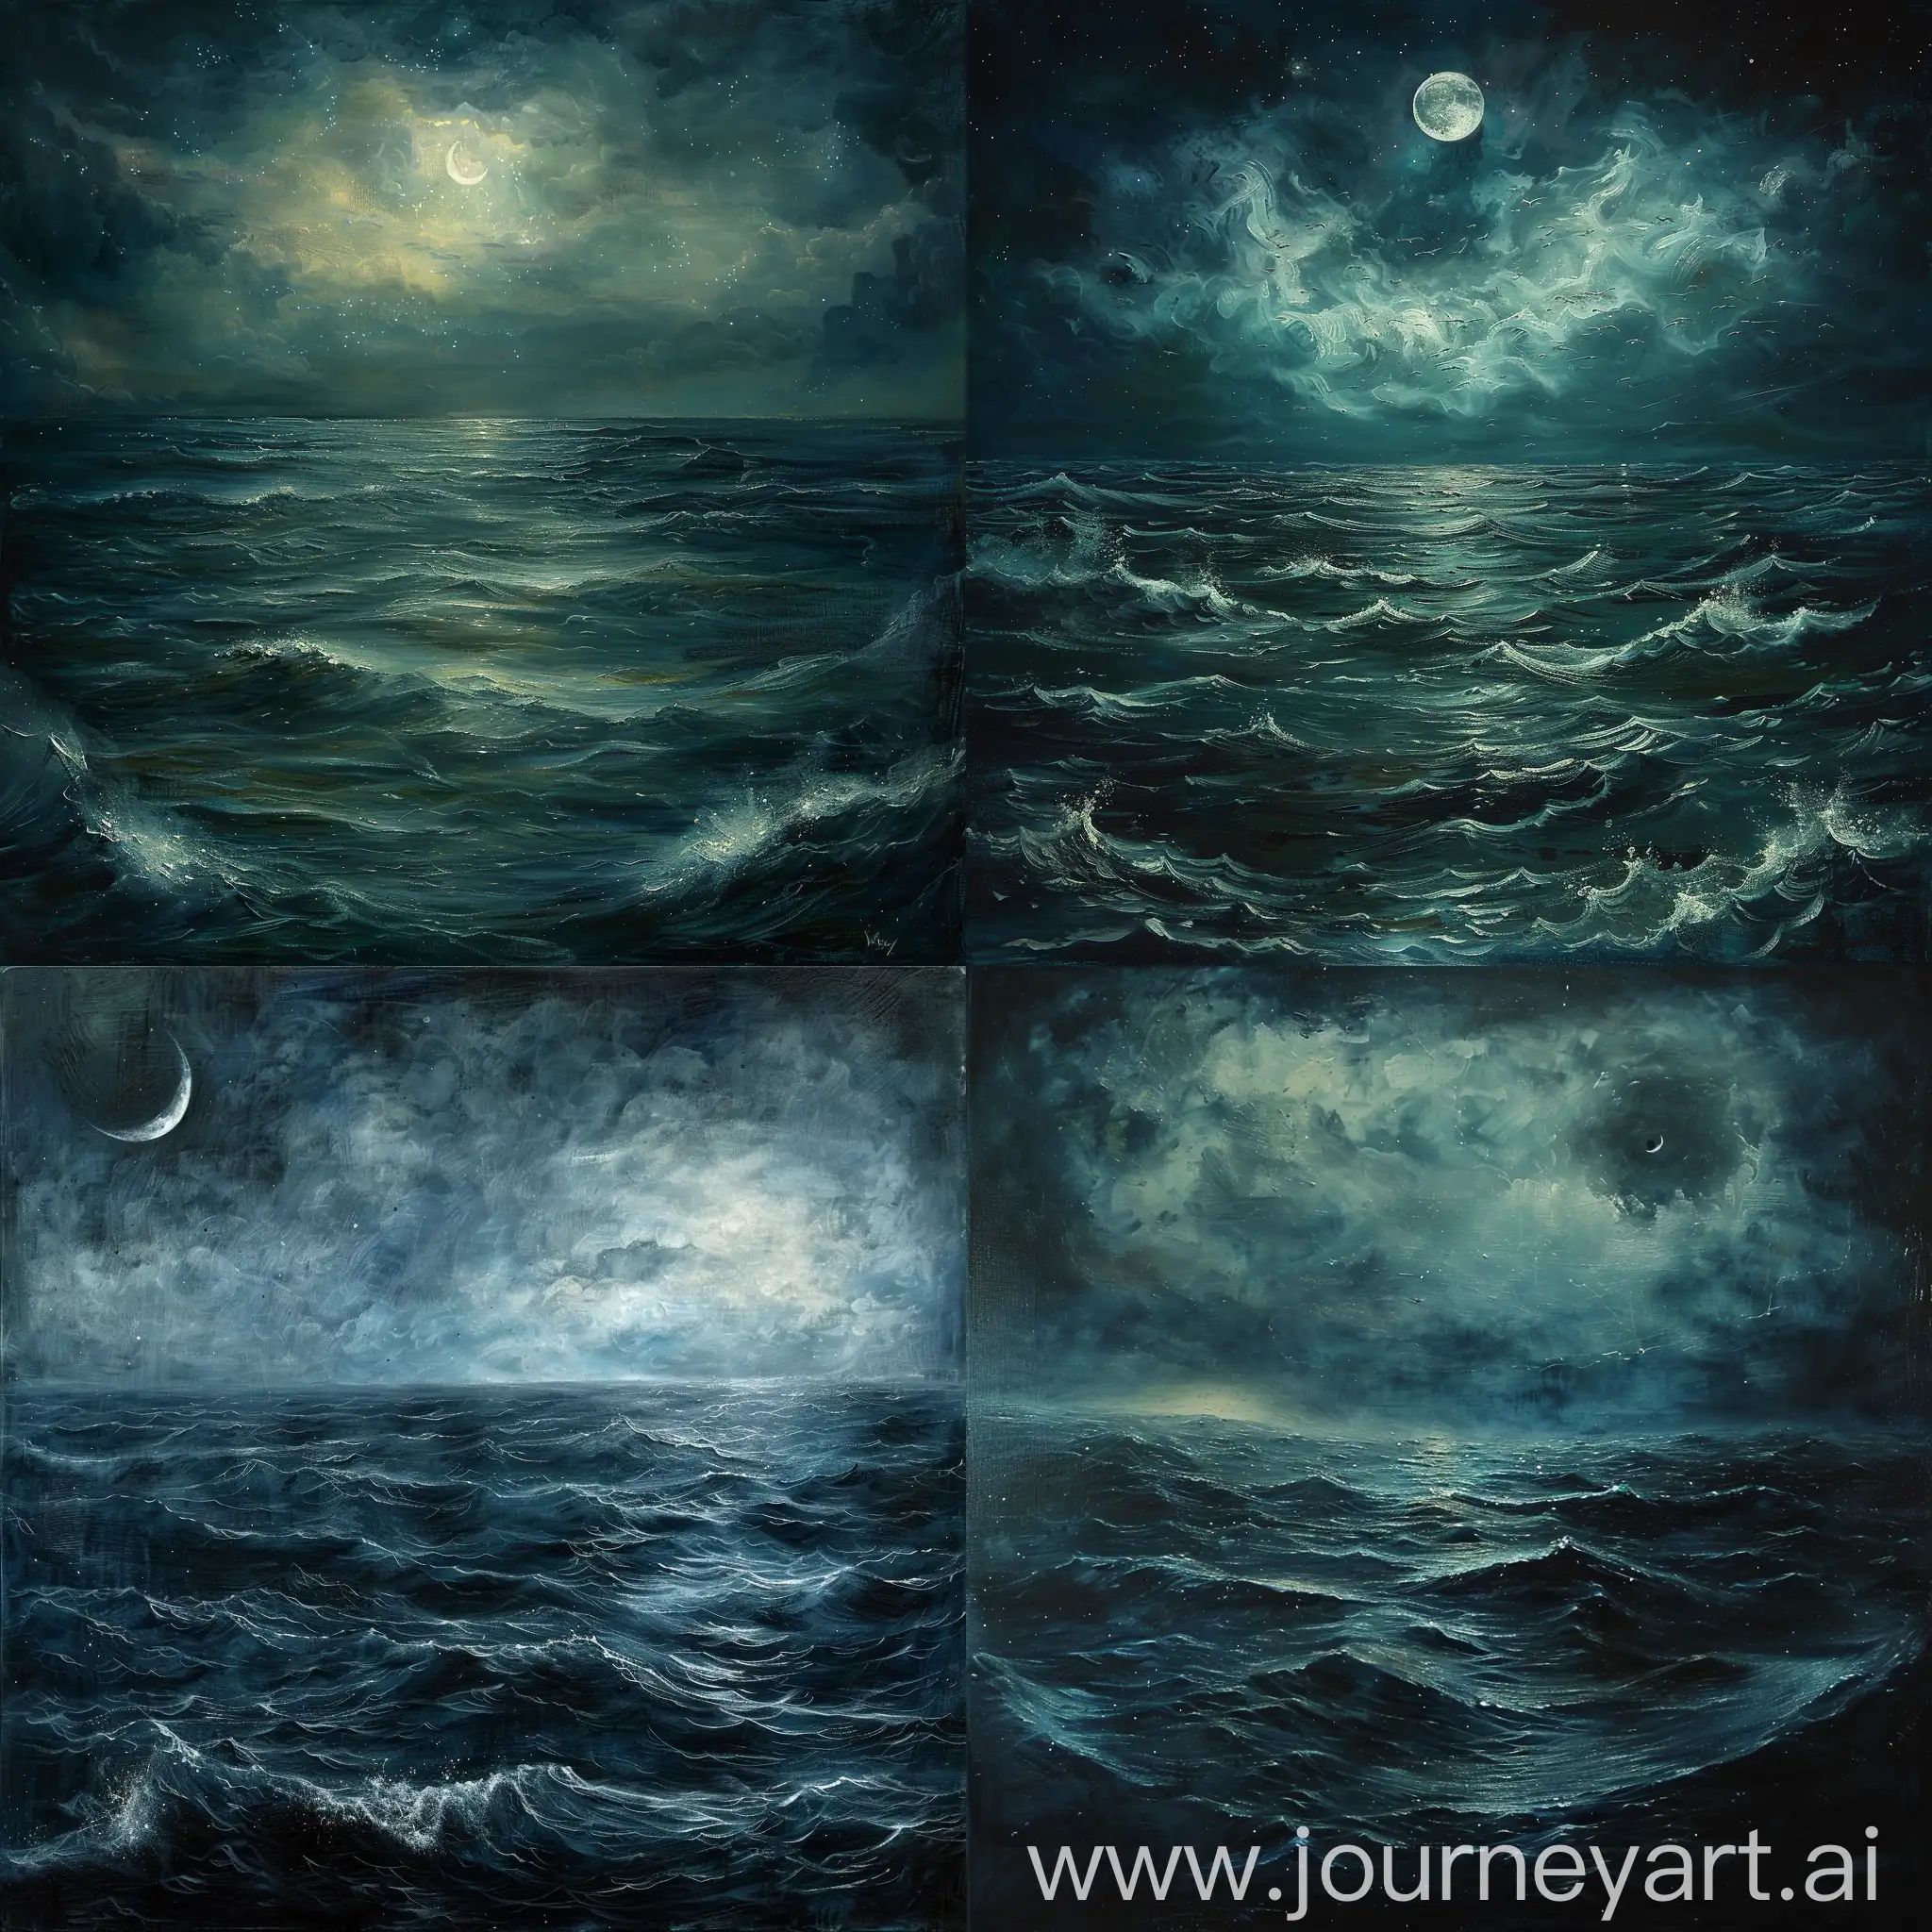 Art for an audio cd cover witch depicts a slightly serene nightmarish night sea, dark oil painting style